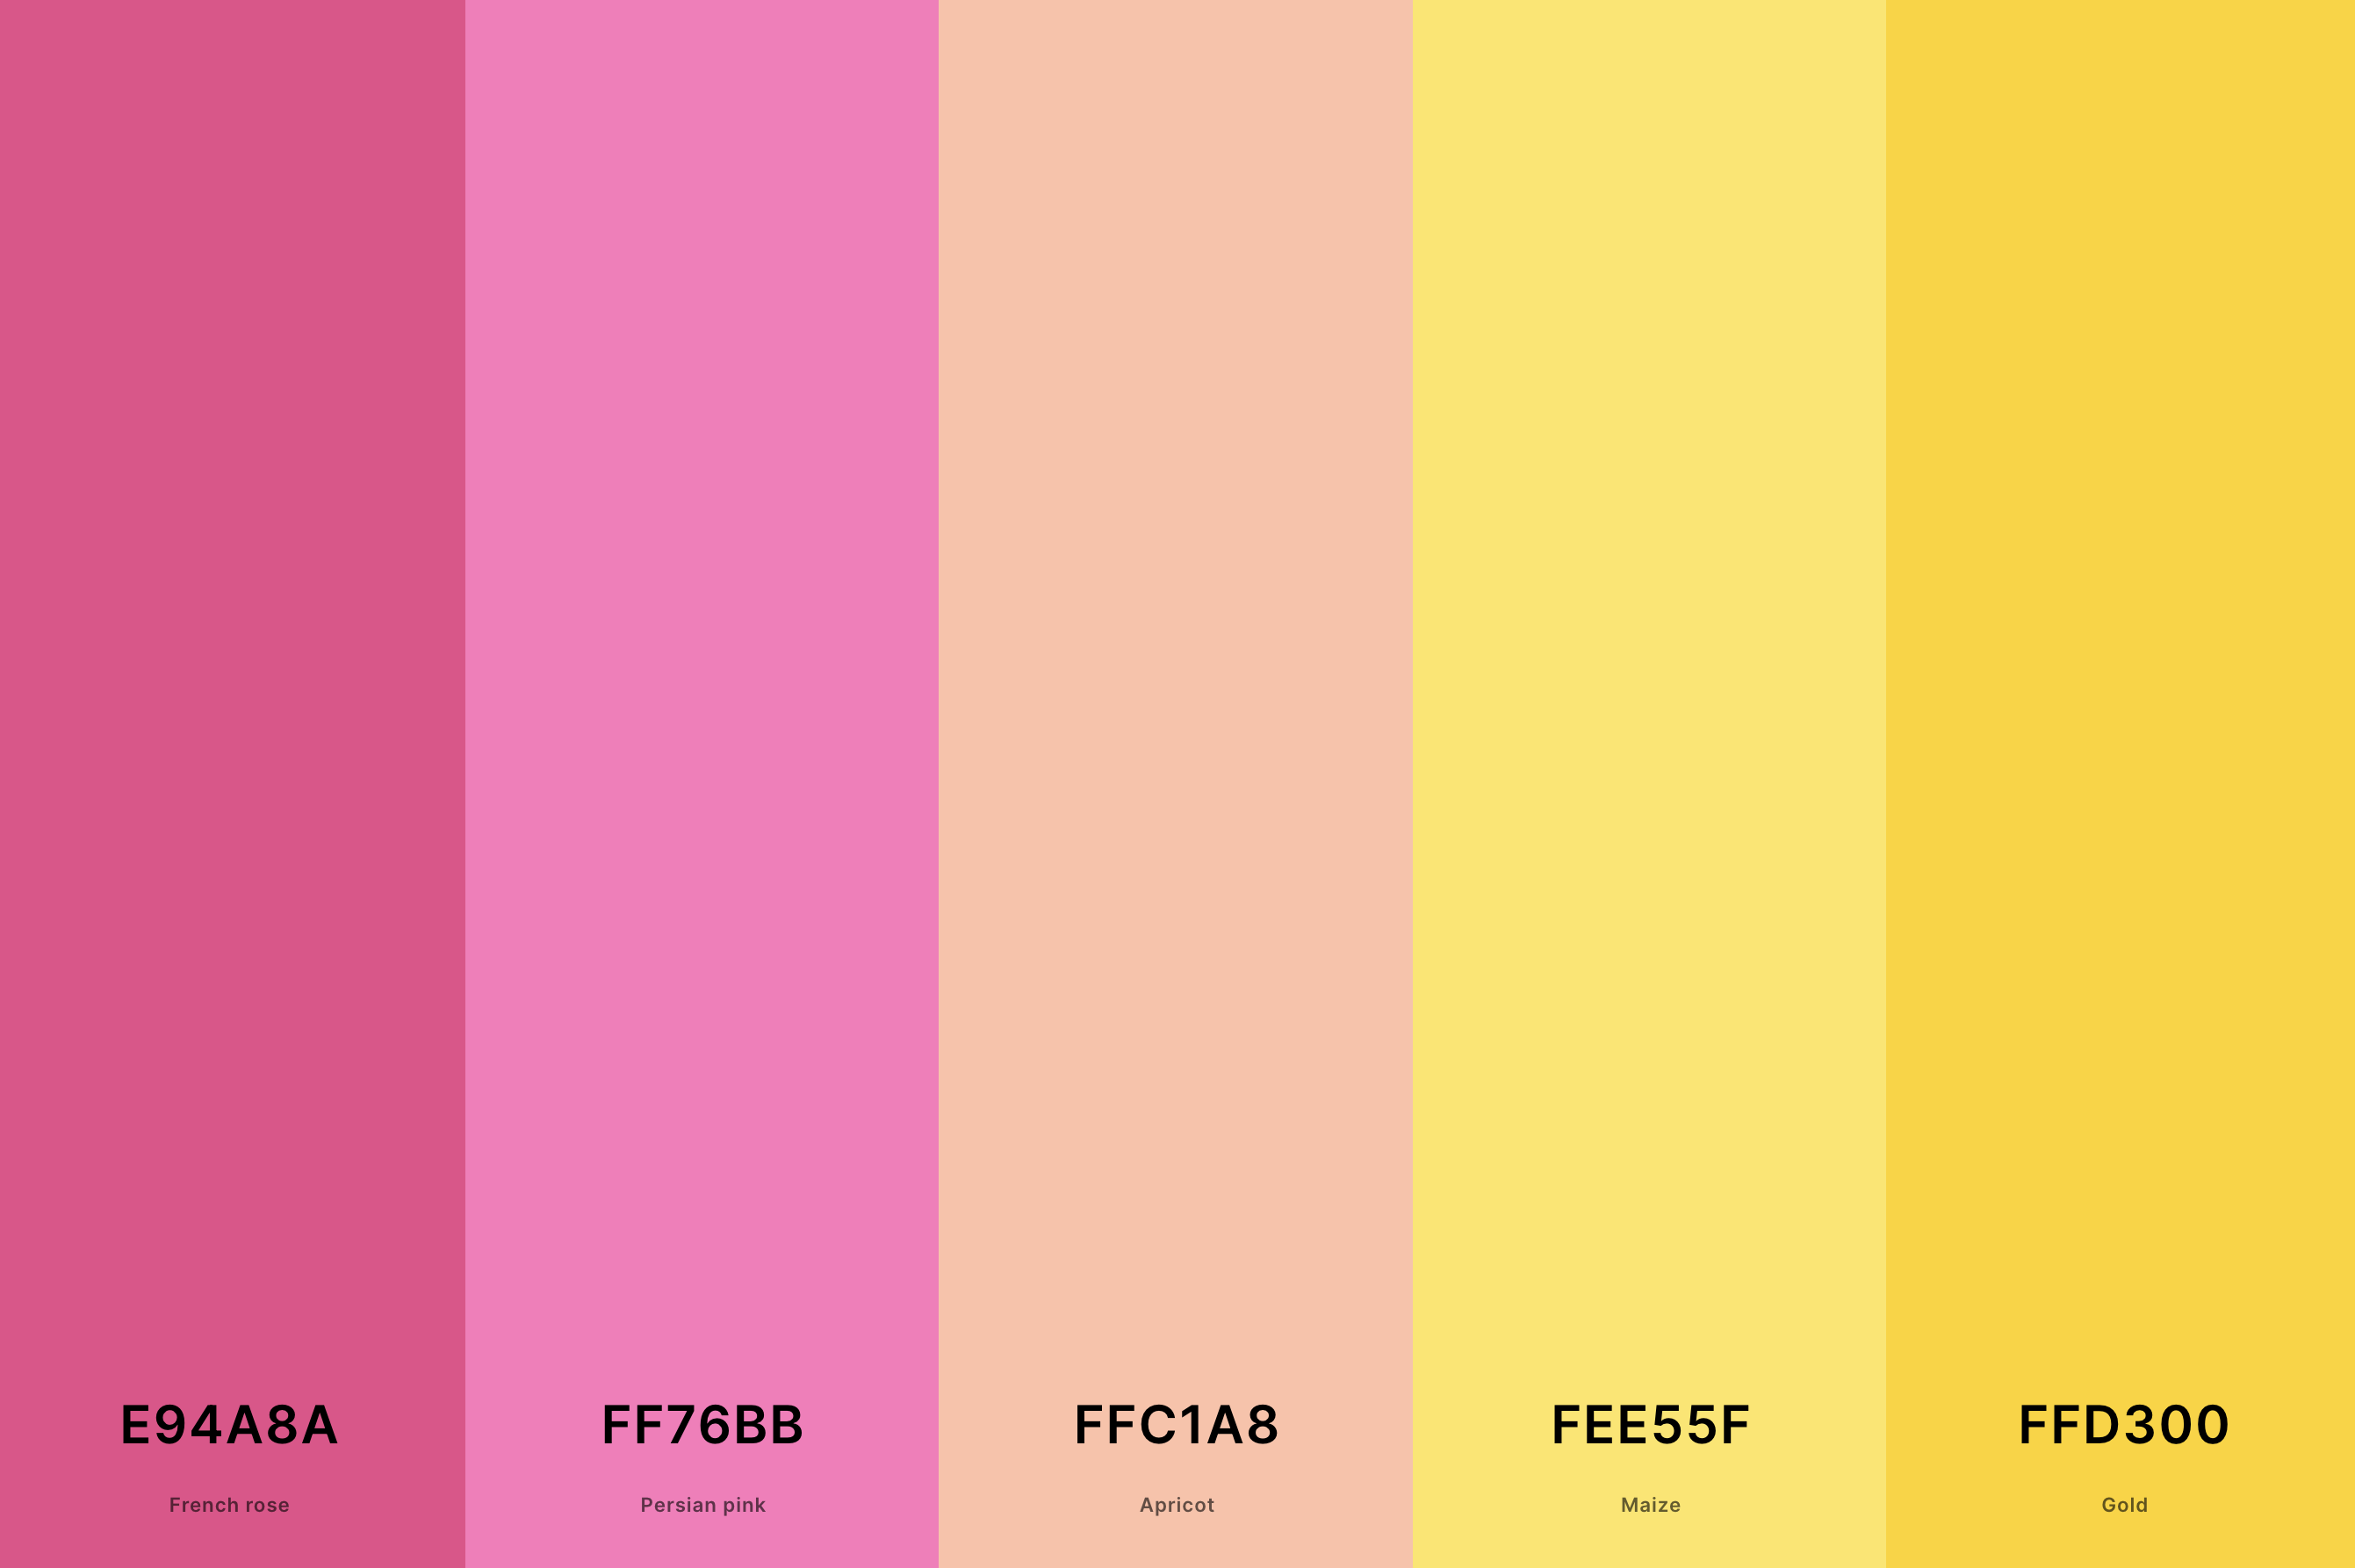 7. Pink And Yellow Color Palette Color Palette with French Rose (Hex #E94A8A) + Persian Pink (Hex #FF76BB) + Apricot (Hex #FFC1A8) + Maize (Hex #FEE55F) + Gold (Hex #FFD300) Color Palette with Hex Codes